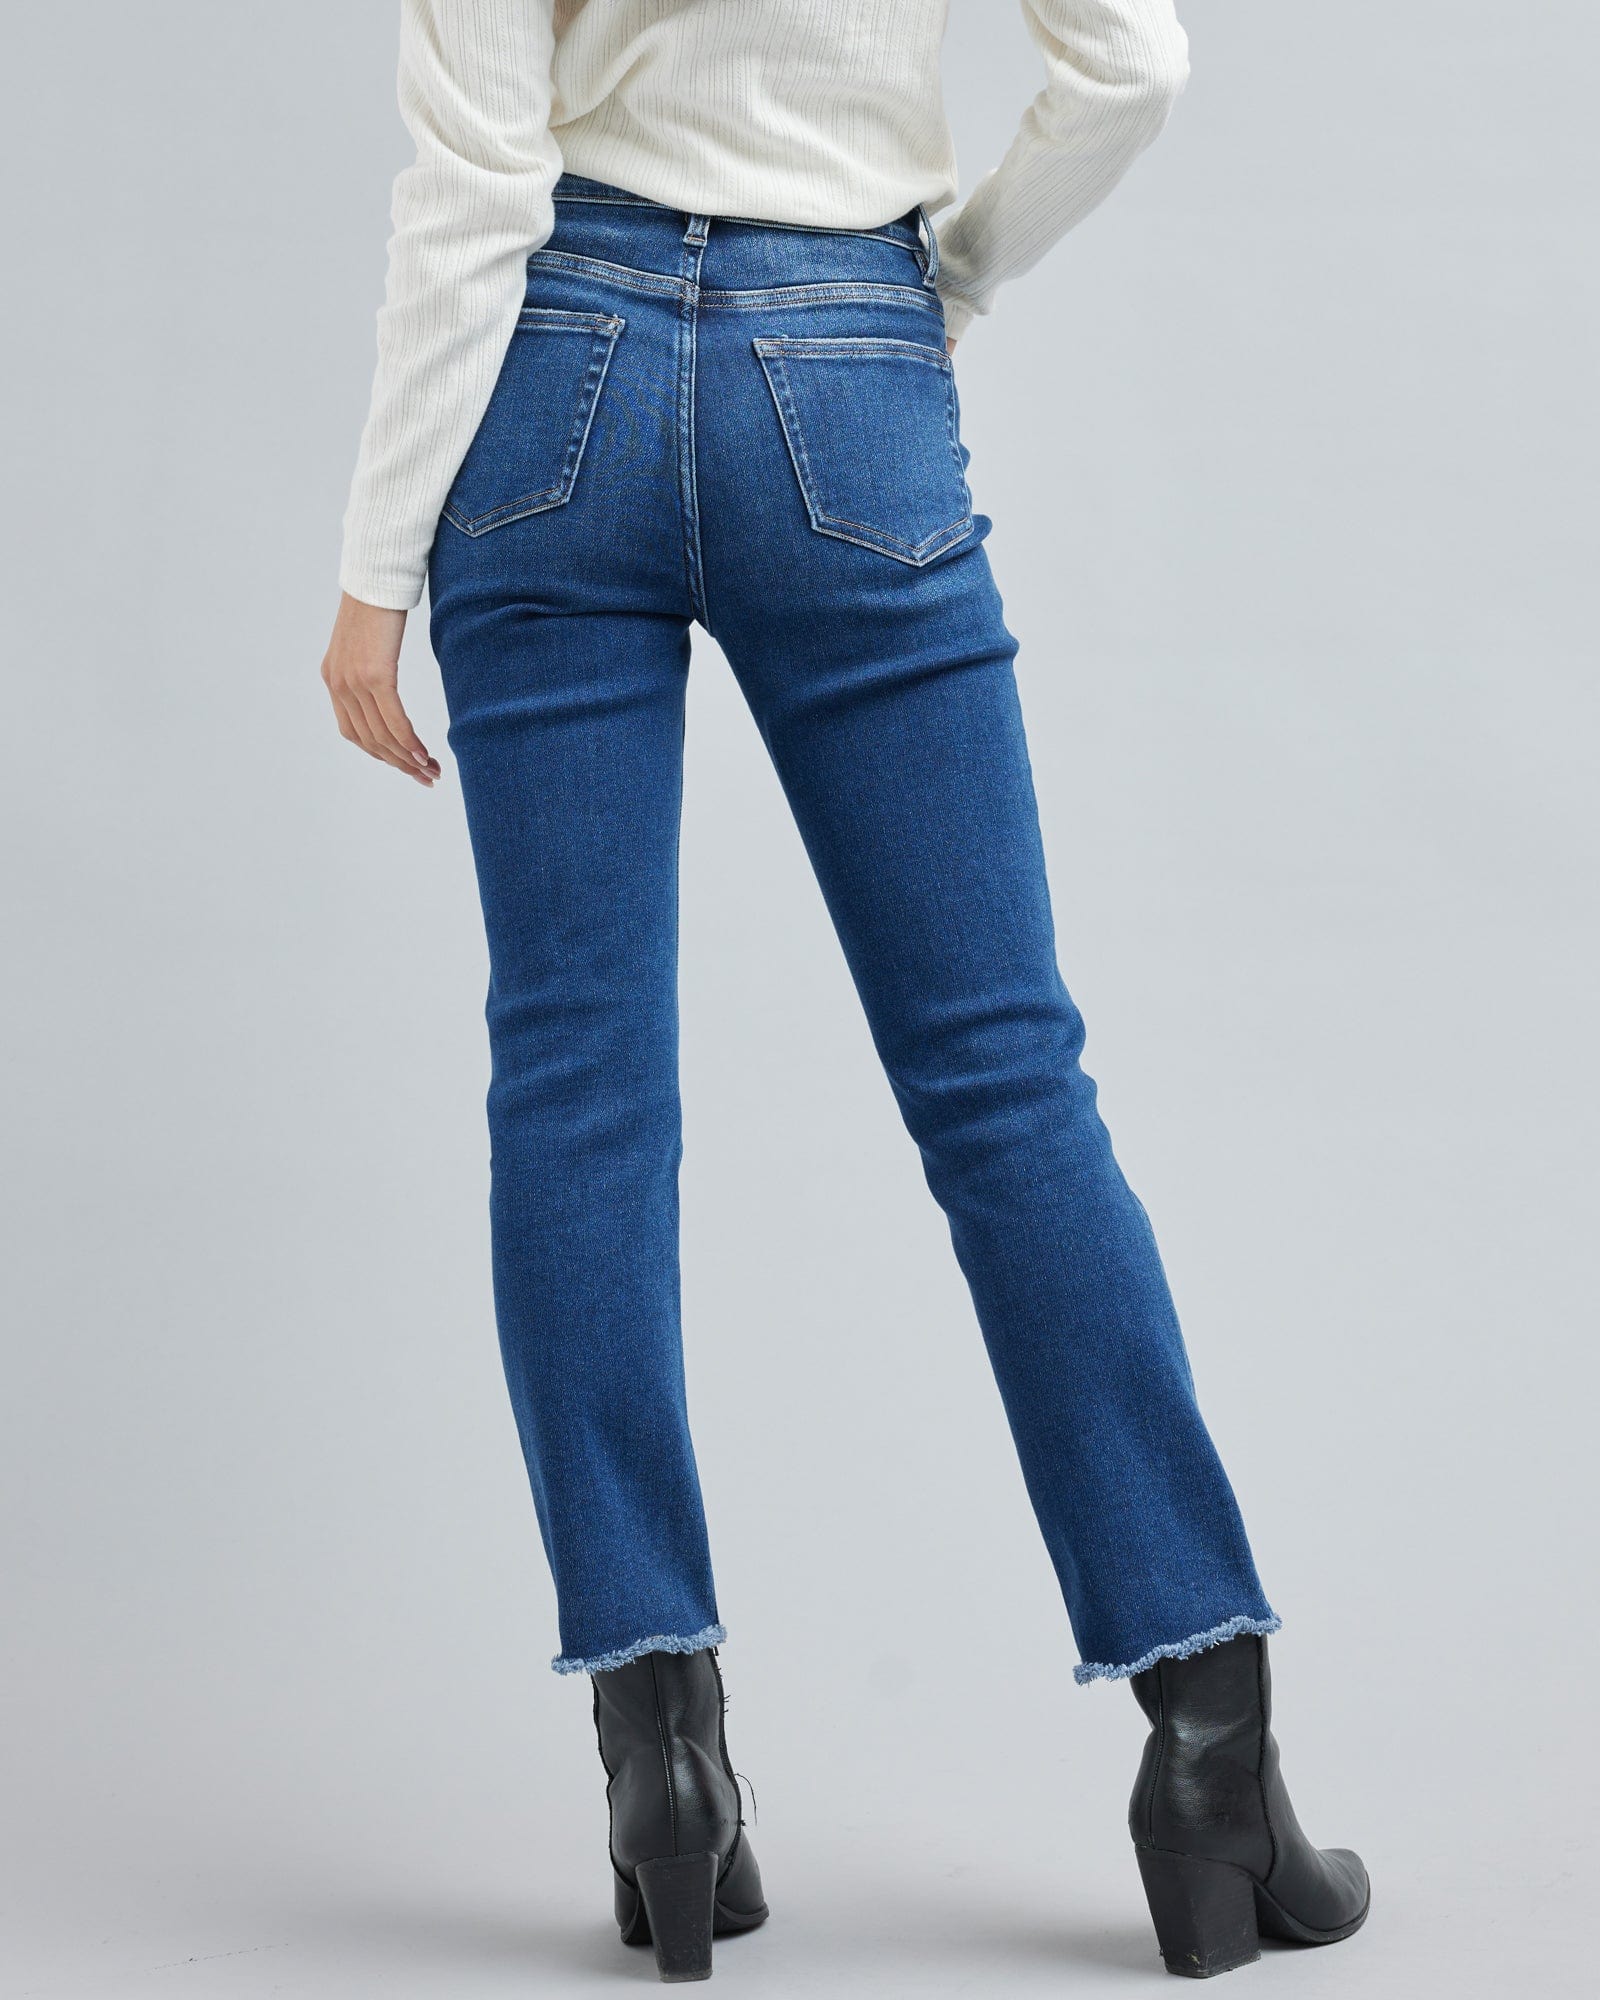 Woman in a blue washed denim pant